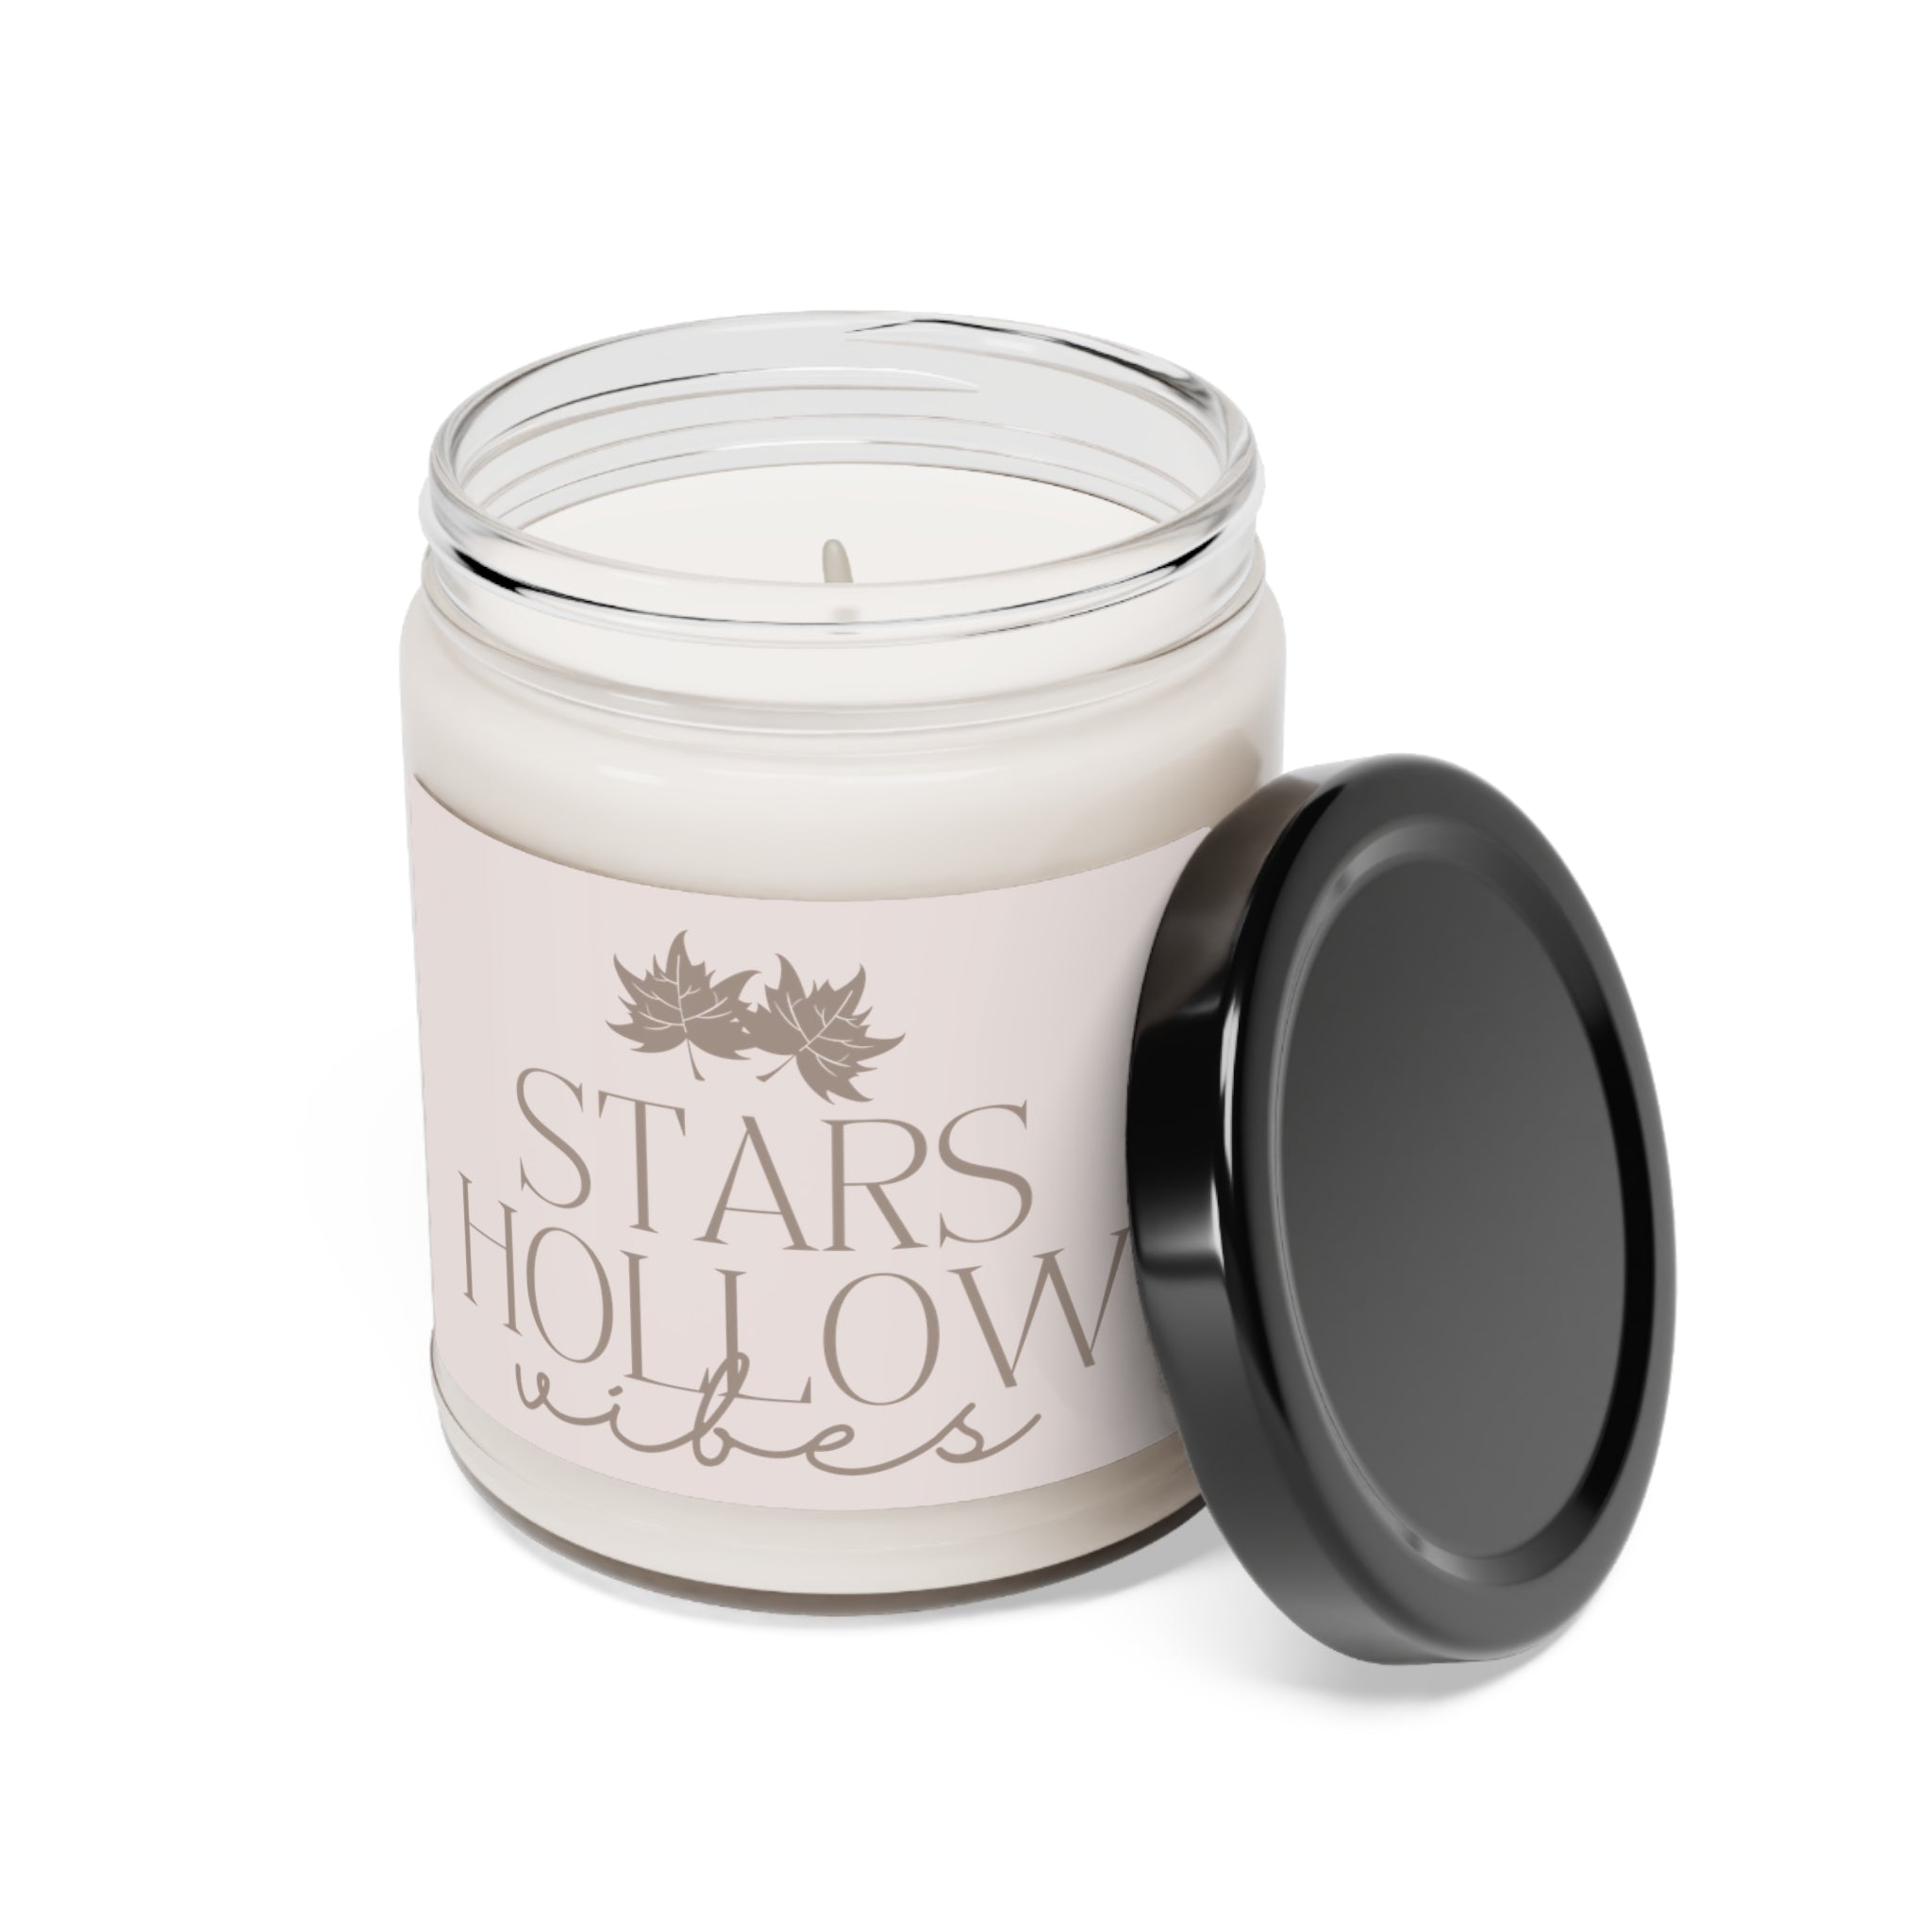 Gilmore Girls Scented Soy Candle